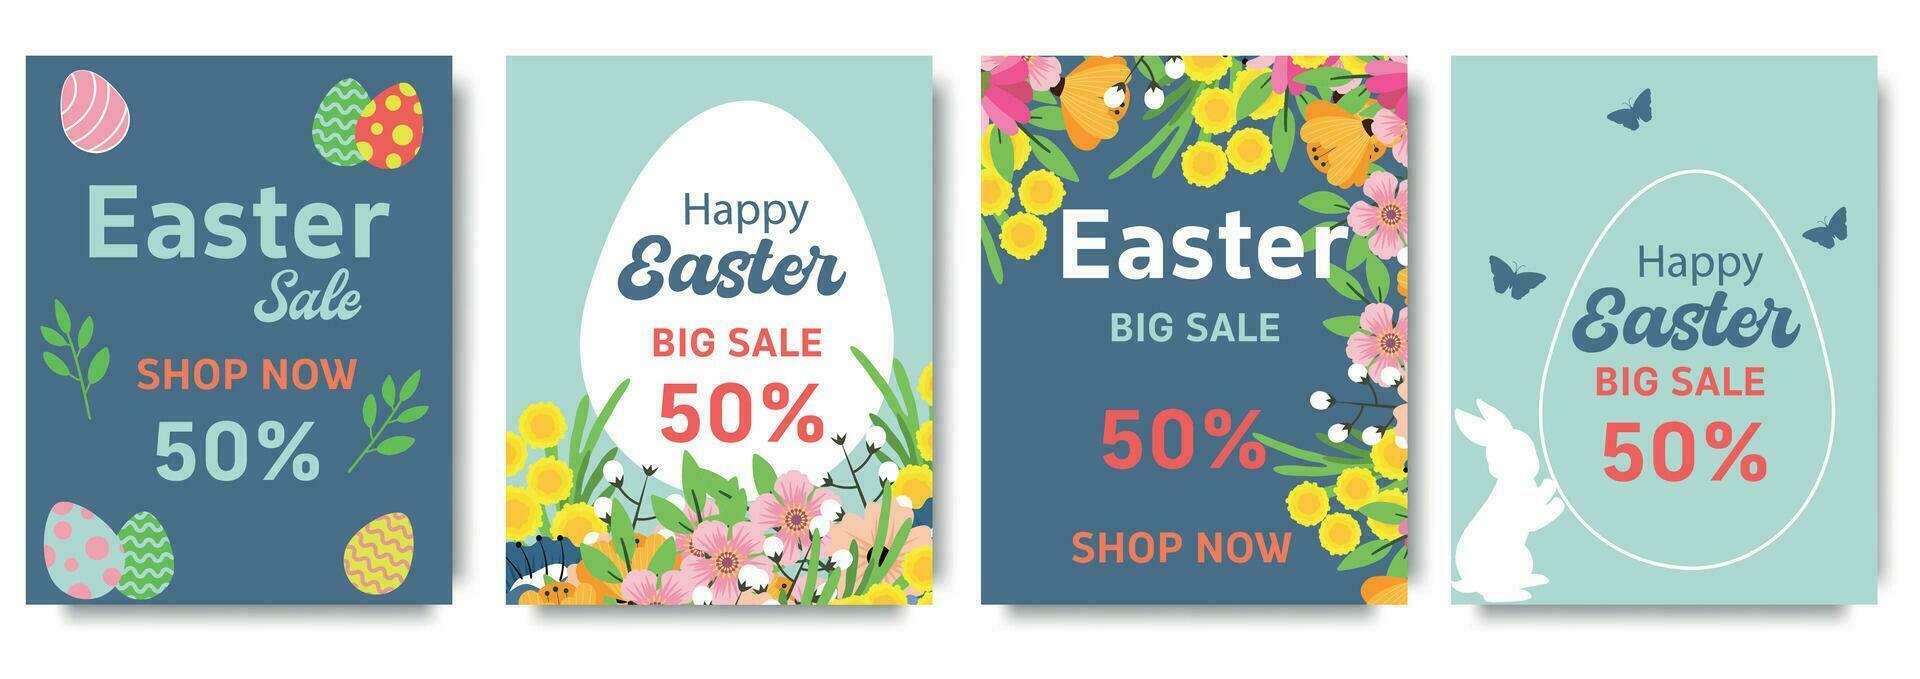 Set of trendy minimal Easter Sale posters with Color Painted Egg, Spring Flower and Rabbit. Spring background, cover, sale banner, flyer design. Template for advertising, web, social media vector